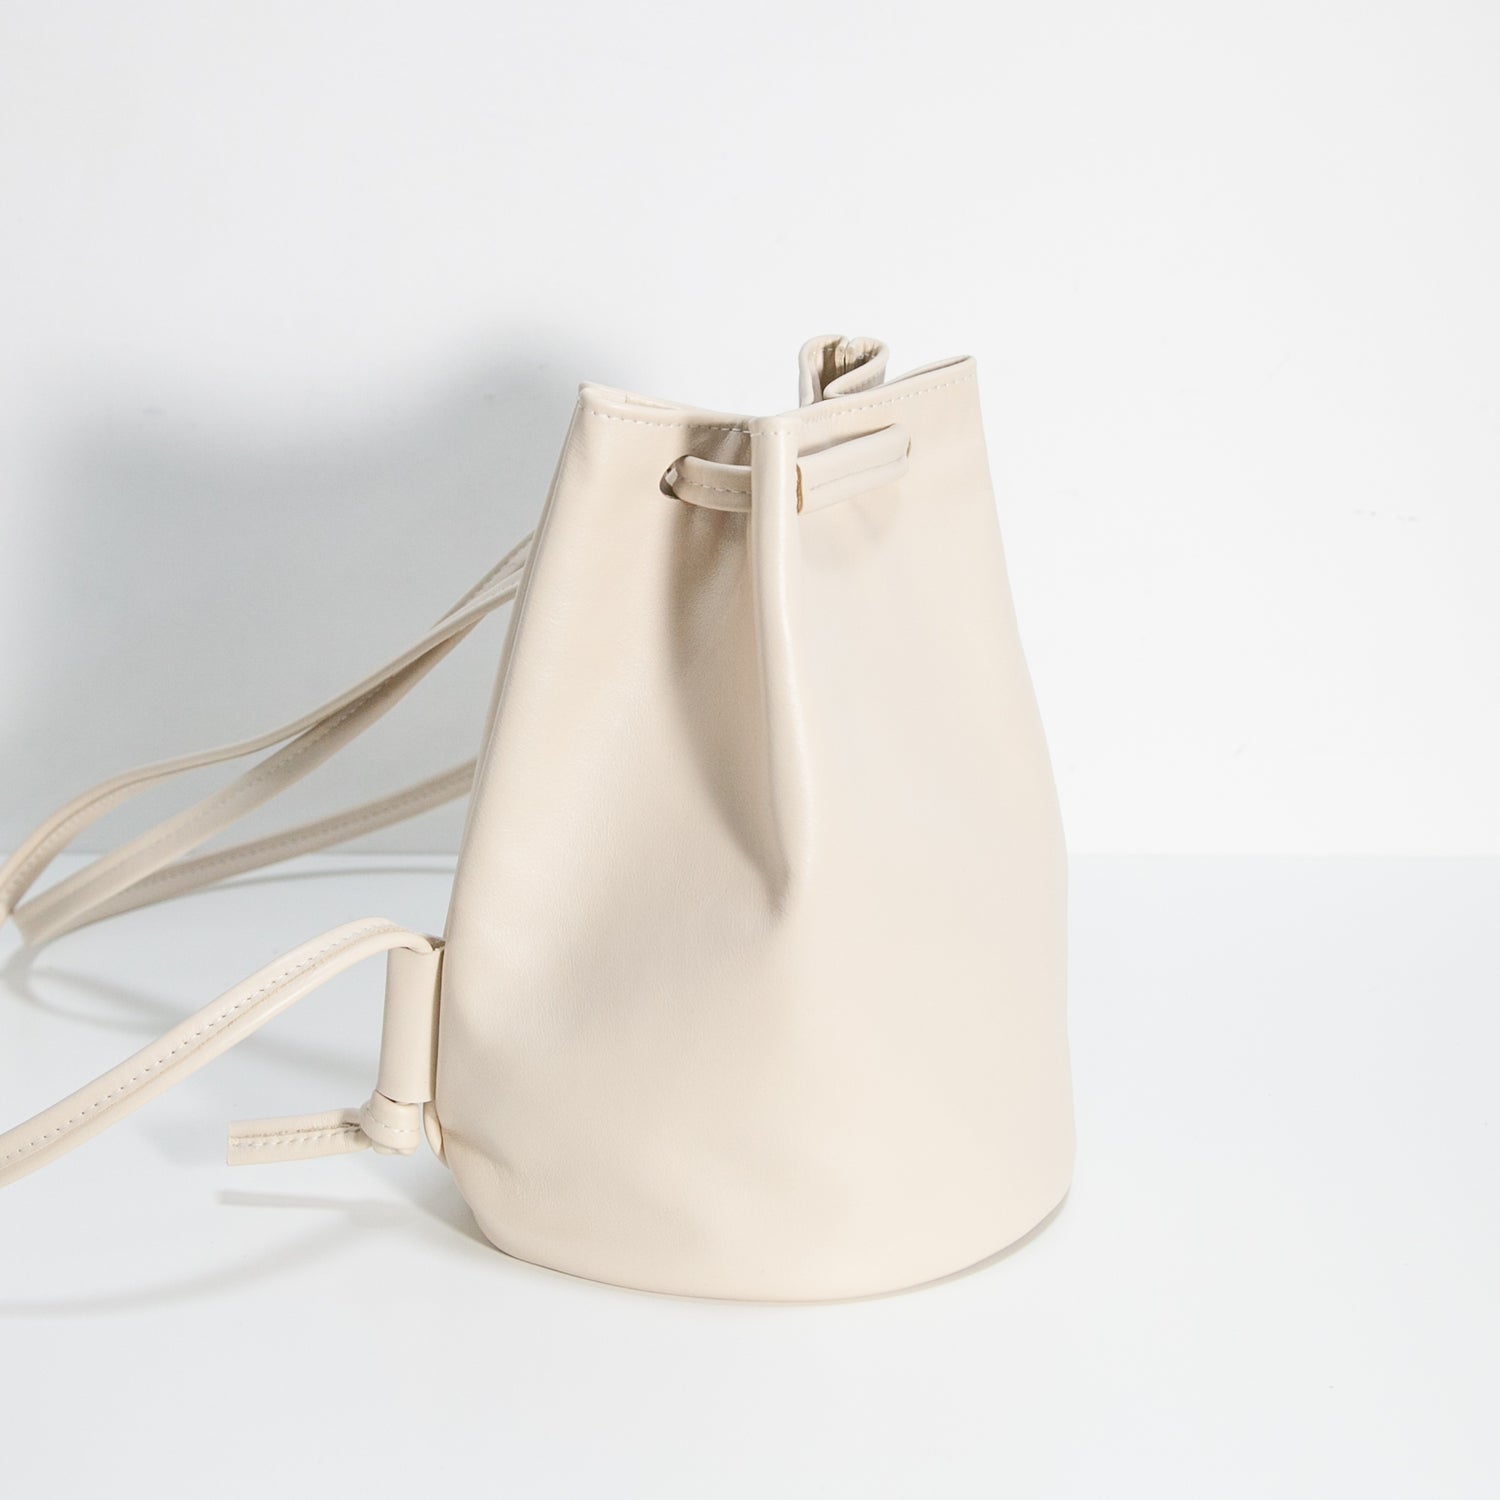 Small Hours | Personalized leather goods + minimalist bags